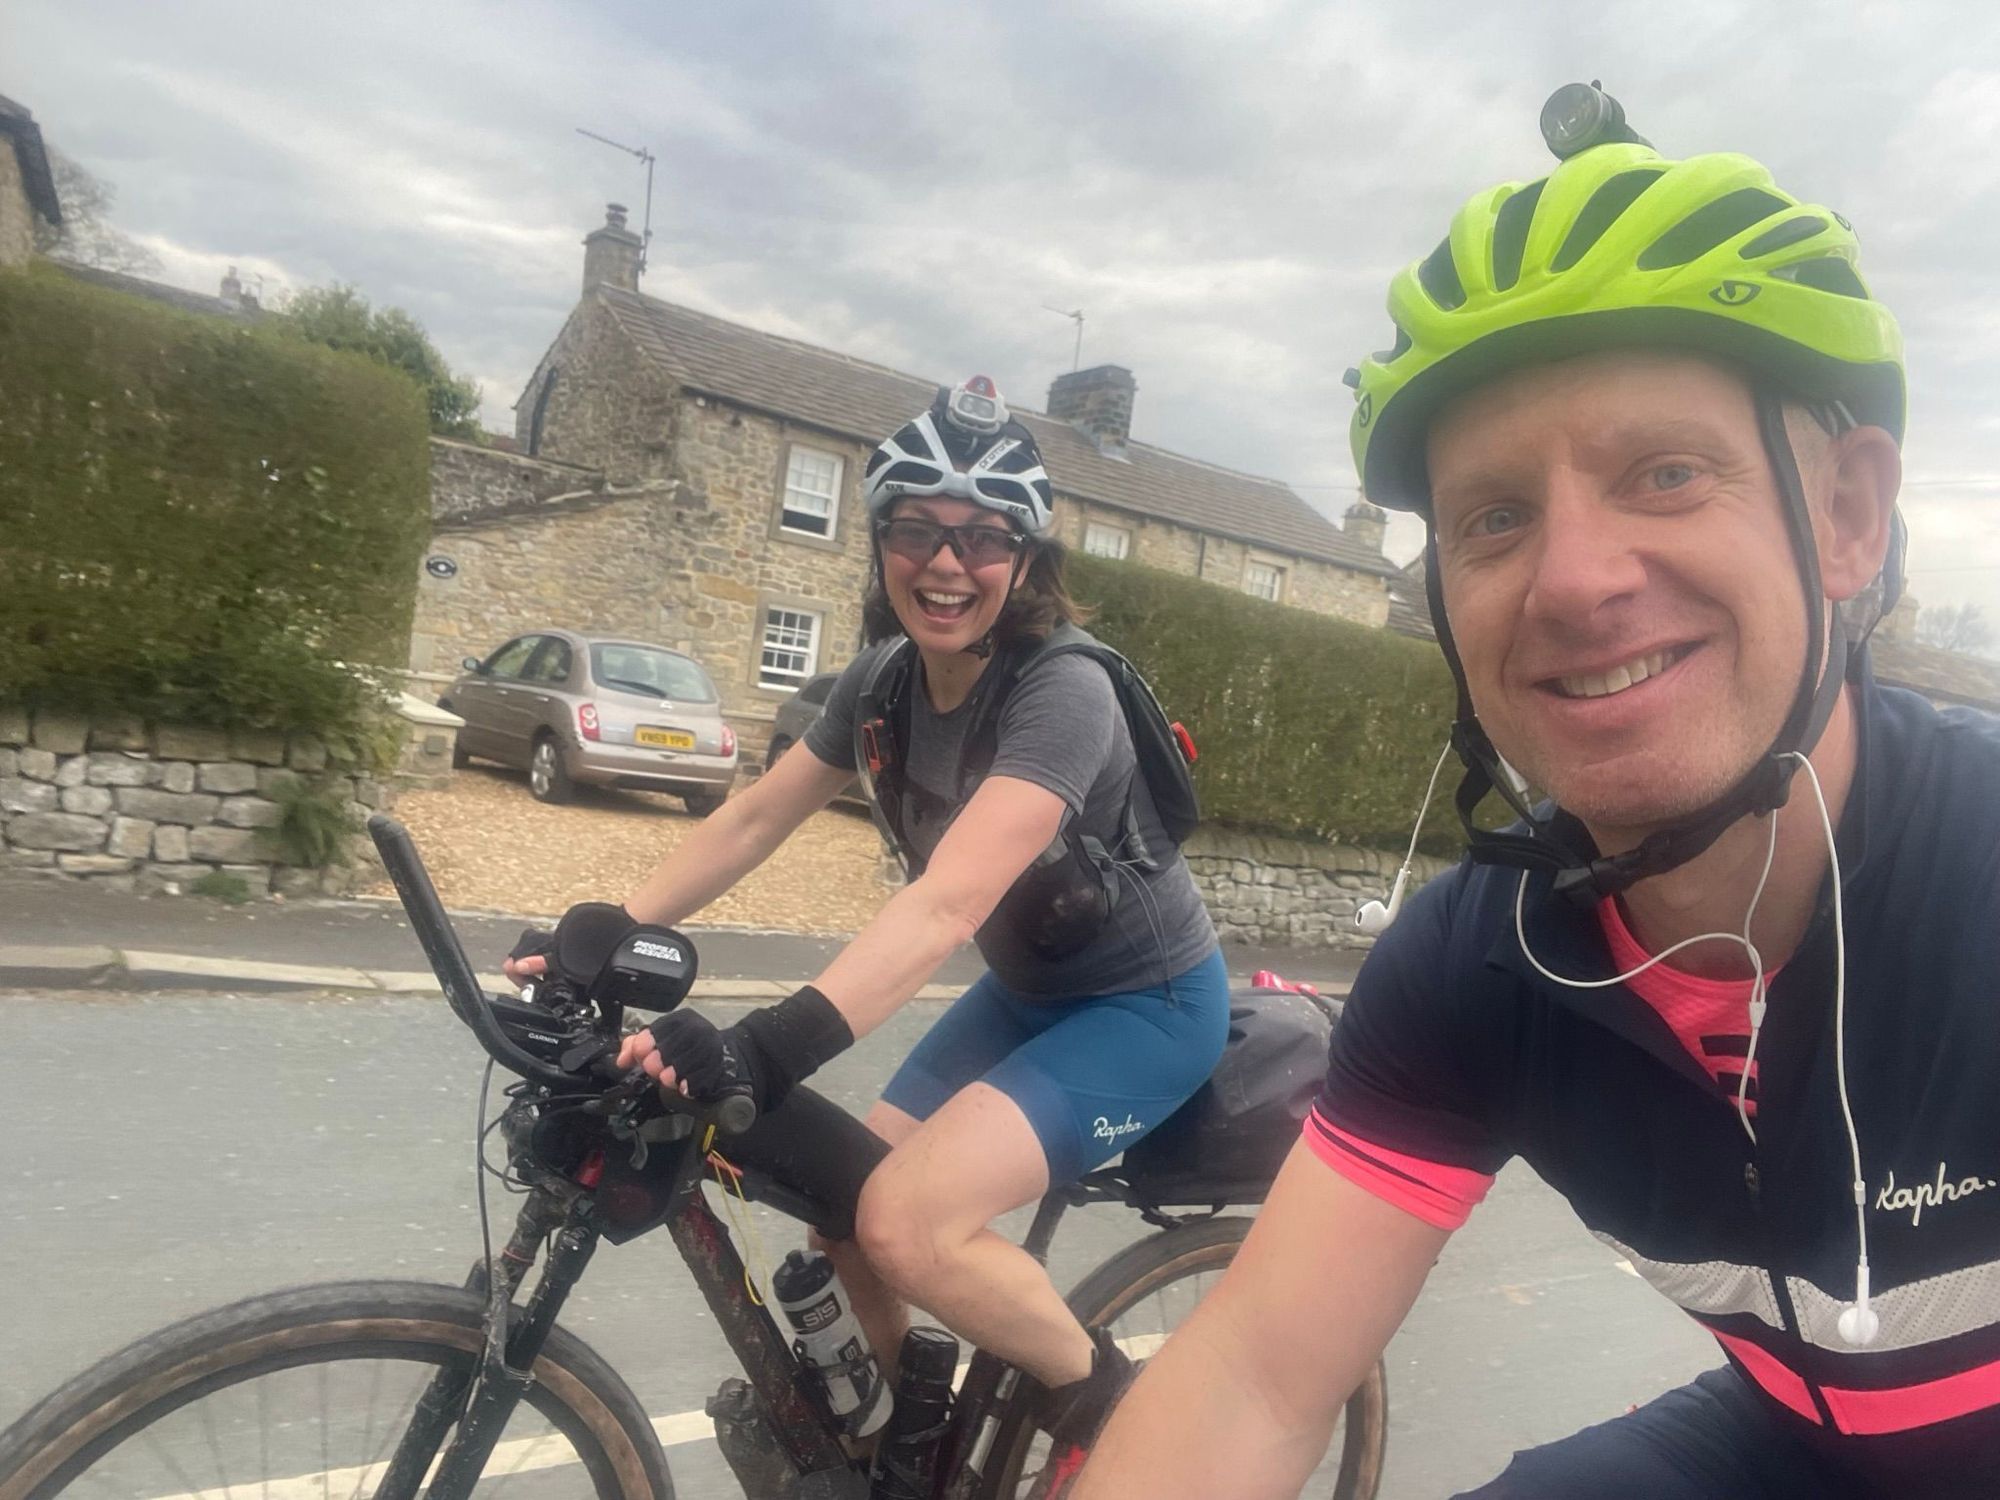 Sarah Rose: A comeback to health and cycling